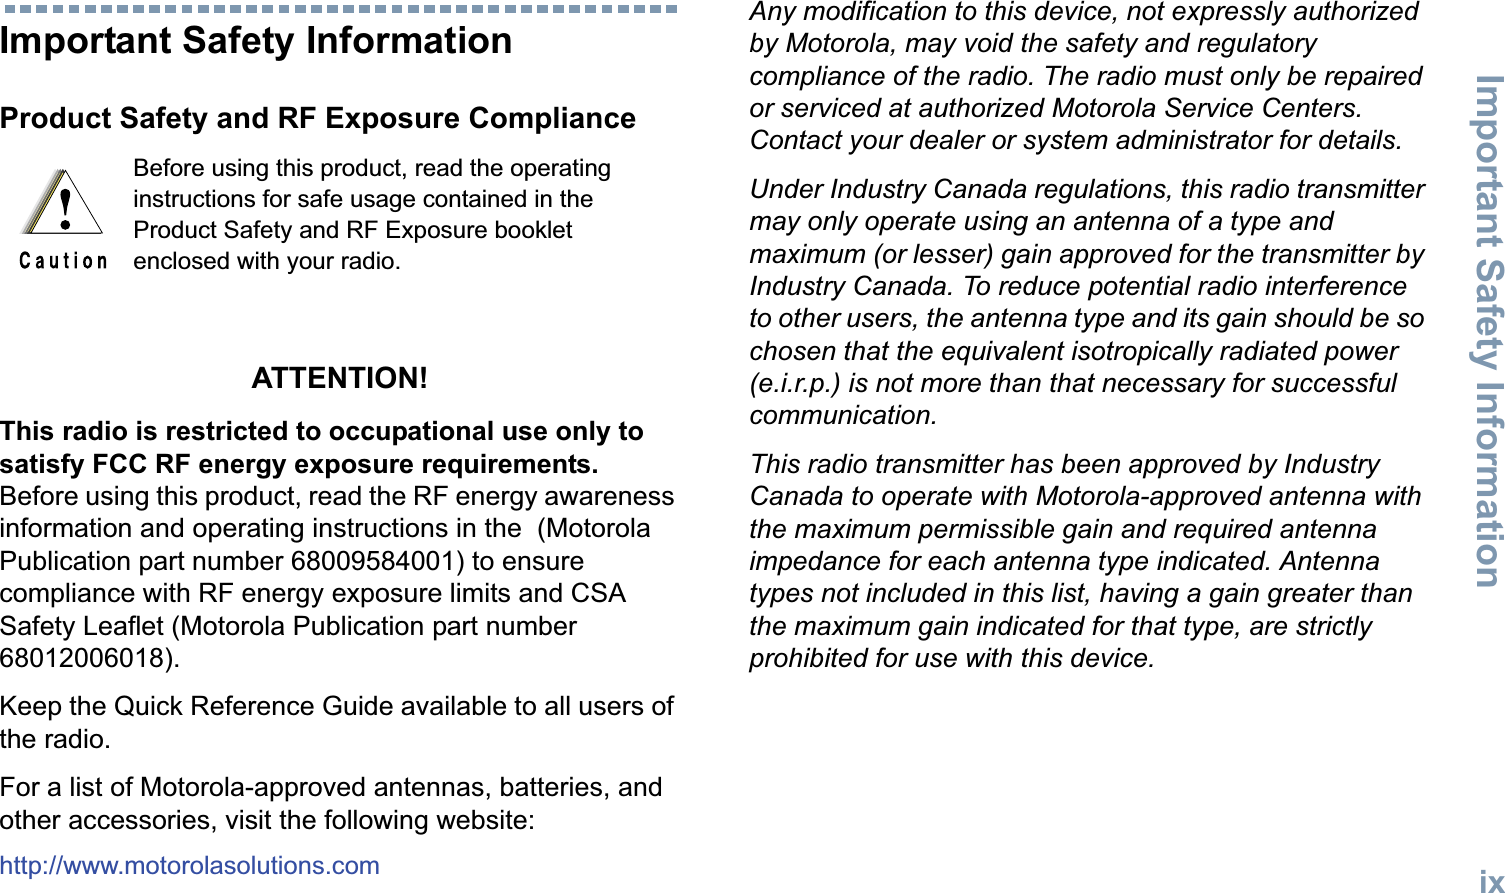 Important Safety InformationEnglishixImportant Safety InformationProduct Safety and RF Exposure ComplianceATTENTION! This radio is restricted to occupational use only to satisfy FCC RF energy exposure requirements. Before using this product, read the RF energy awareness information and operating instructions in the  (Motorola Publication part number 68009584001) to ensure compliance with RF energy exposure limits and CSA Safety Leaflet (Motorola Publication part number 68012006018). Keep the Quick Reference Guide available to all users of the radio. For a list of Motorola-approved antennas, batteries, and other accessories, visit the following website: http://www.motorolasolutions.comAny modification to this device, not expressly authorized by Motorola, may void the safety and regulatory compliance of the radio. The radio must only be repaired or serviced at authorized Motorola Service Centers. Contact your dealer or system administrator for details. Under Industry Canada regulations, this radio transmitter may only operate using an antenna of a type and maximum (or lesser) gain approved for the transmitter by Industry Canada. To reduce potential radio interference to other users, the antenna type and its gain should be so chosen that the equivalent isotropically radiated power (e.i.r.p.) is not more than that necessary for successful communication.This radio transmitter has been approved by Industry Canada to operate with Motorola-approved antenna with the maximum permissible gain and required antenna impedance for each antenna type indicated. Antenna types not included in this list, having a gain greater than the maximum gain indicated for that type, are strictly prohibited for use with this device.Before using this product, read the operating instructions for safe usage contained in the Product Safety and RF Exposure booklet enclosed with your radio.